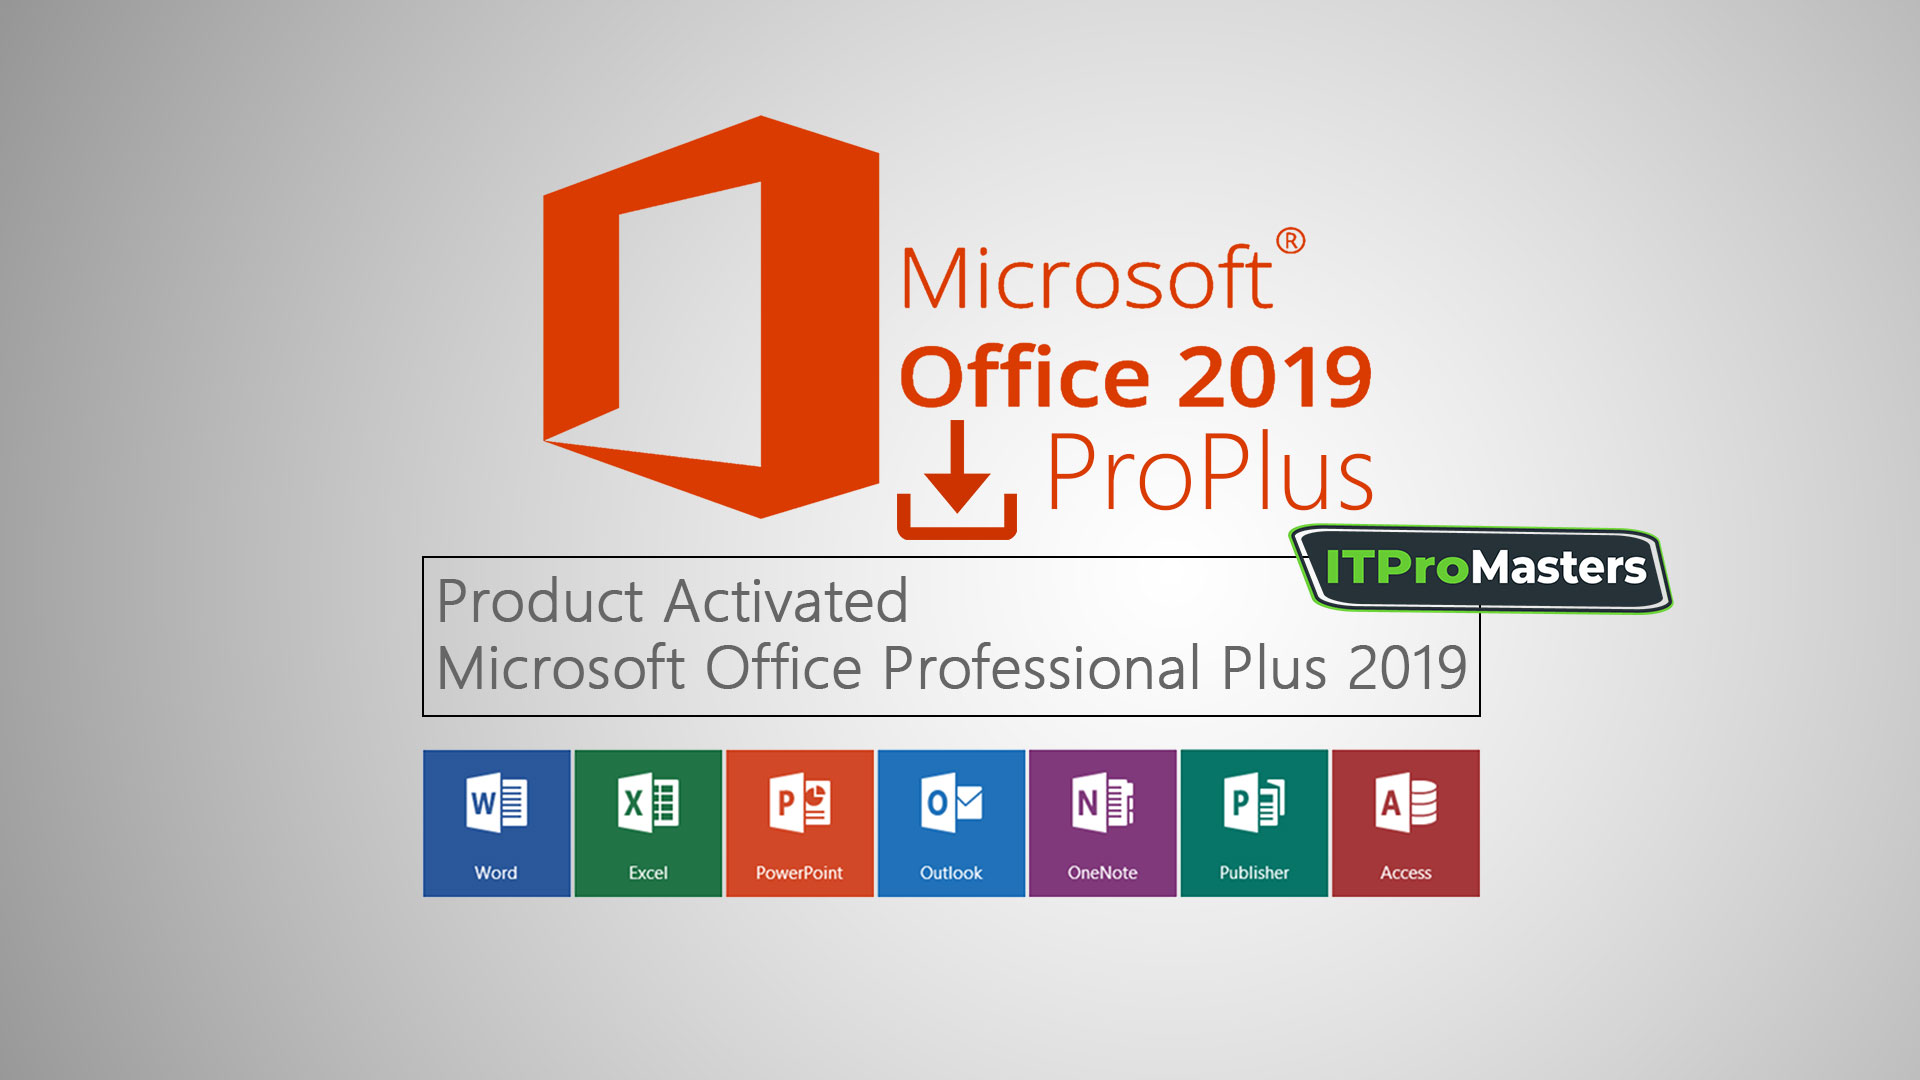 kms activator office 2019 windows 10